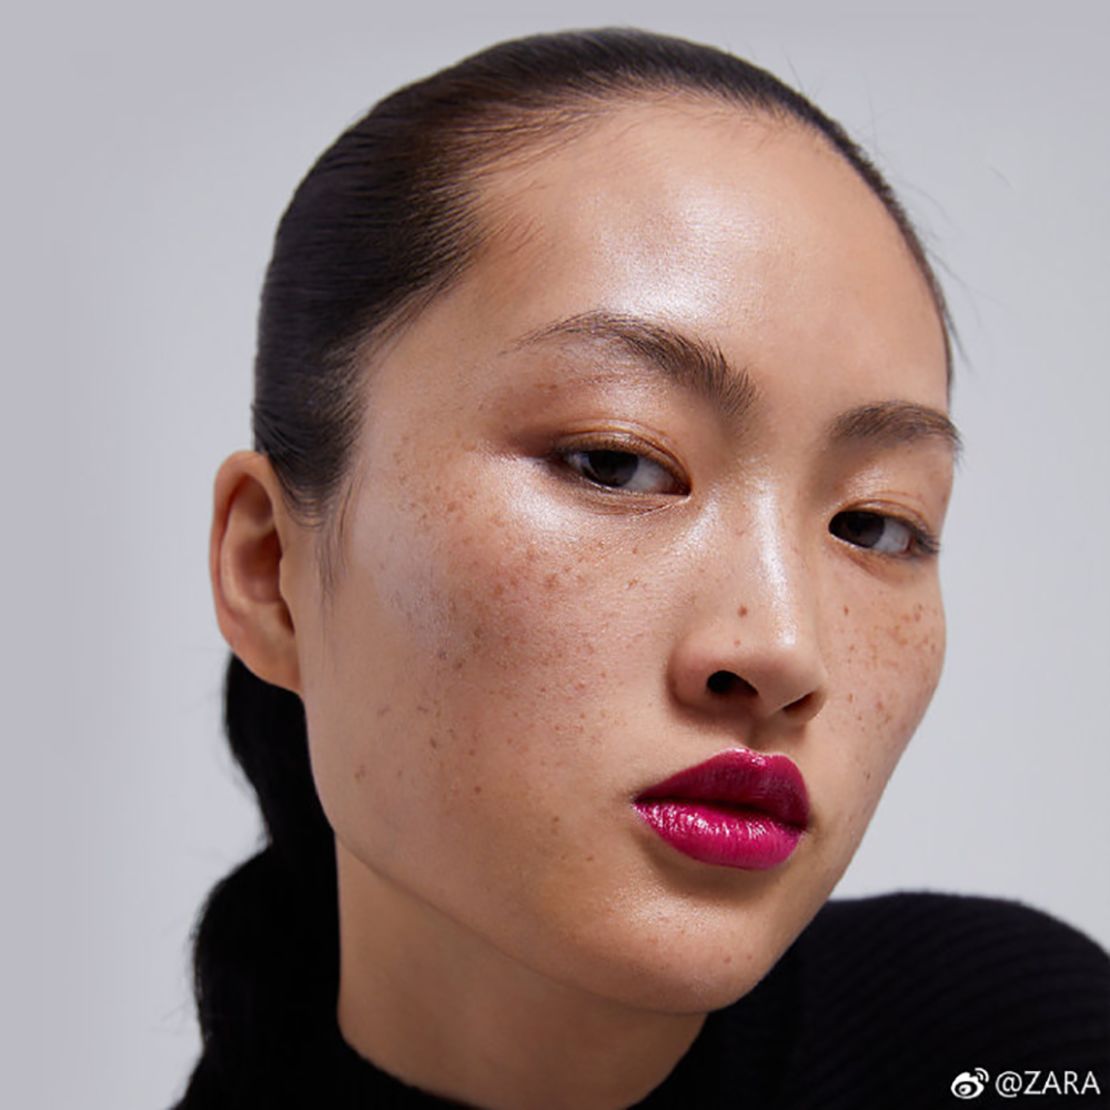 An image of Jing Wen from the Zara campaign.